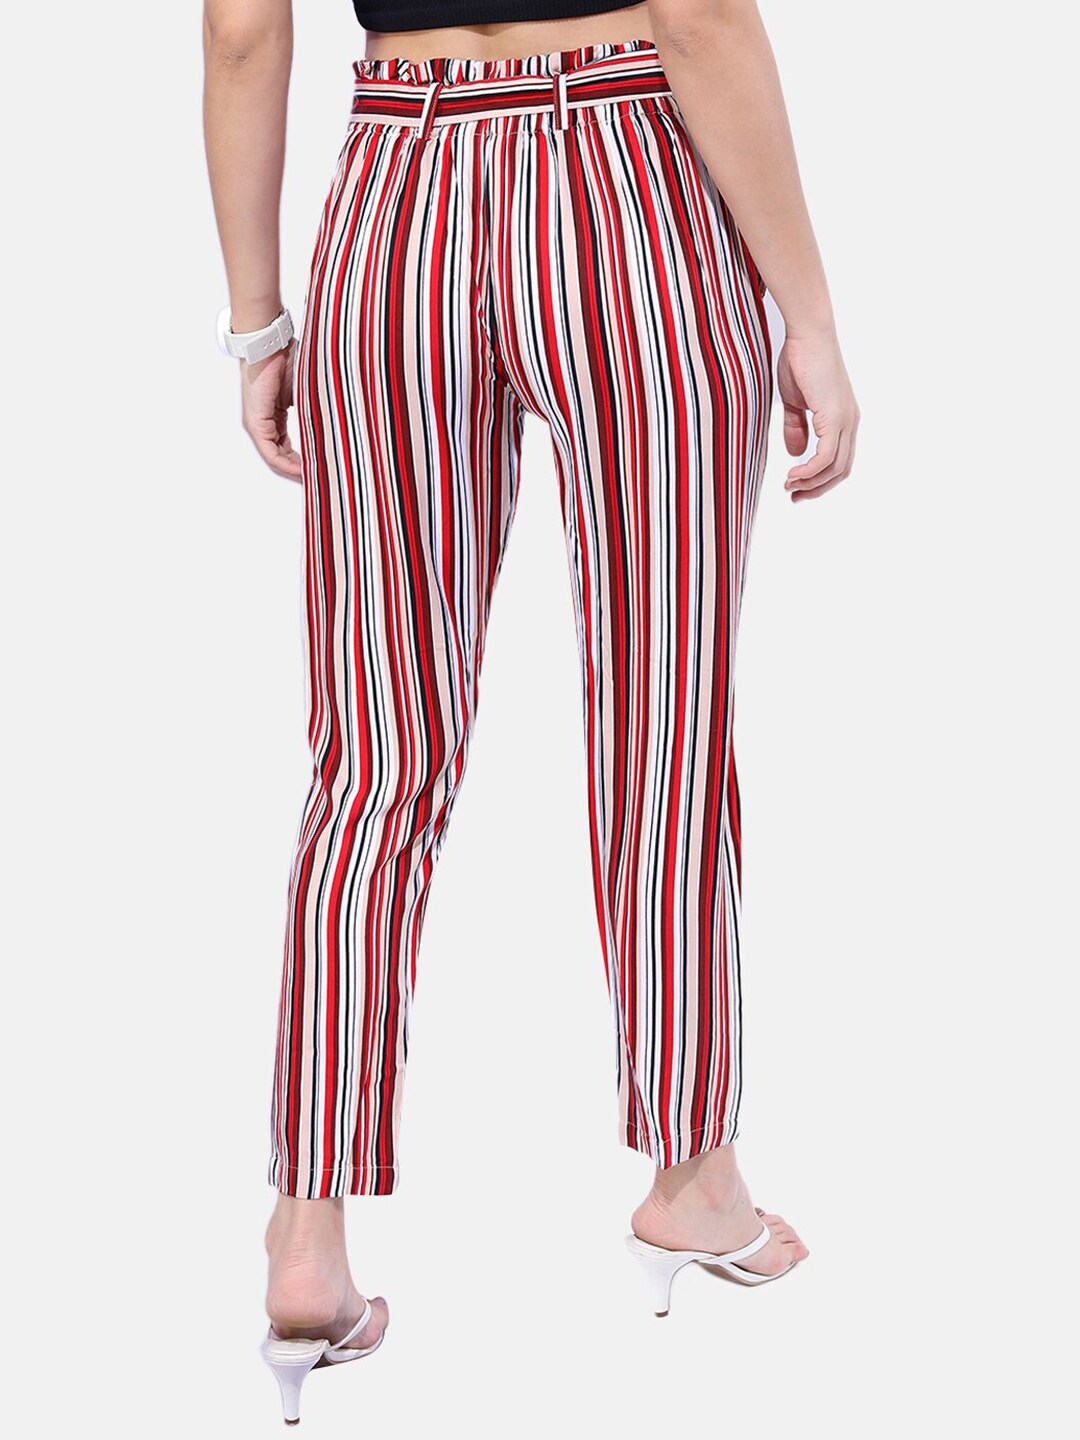 Shop Women Striped Tapered Pants Online.